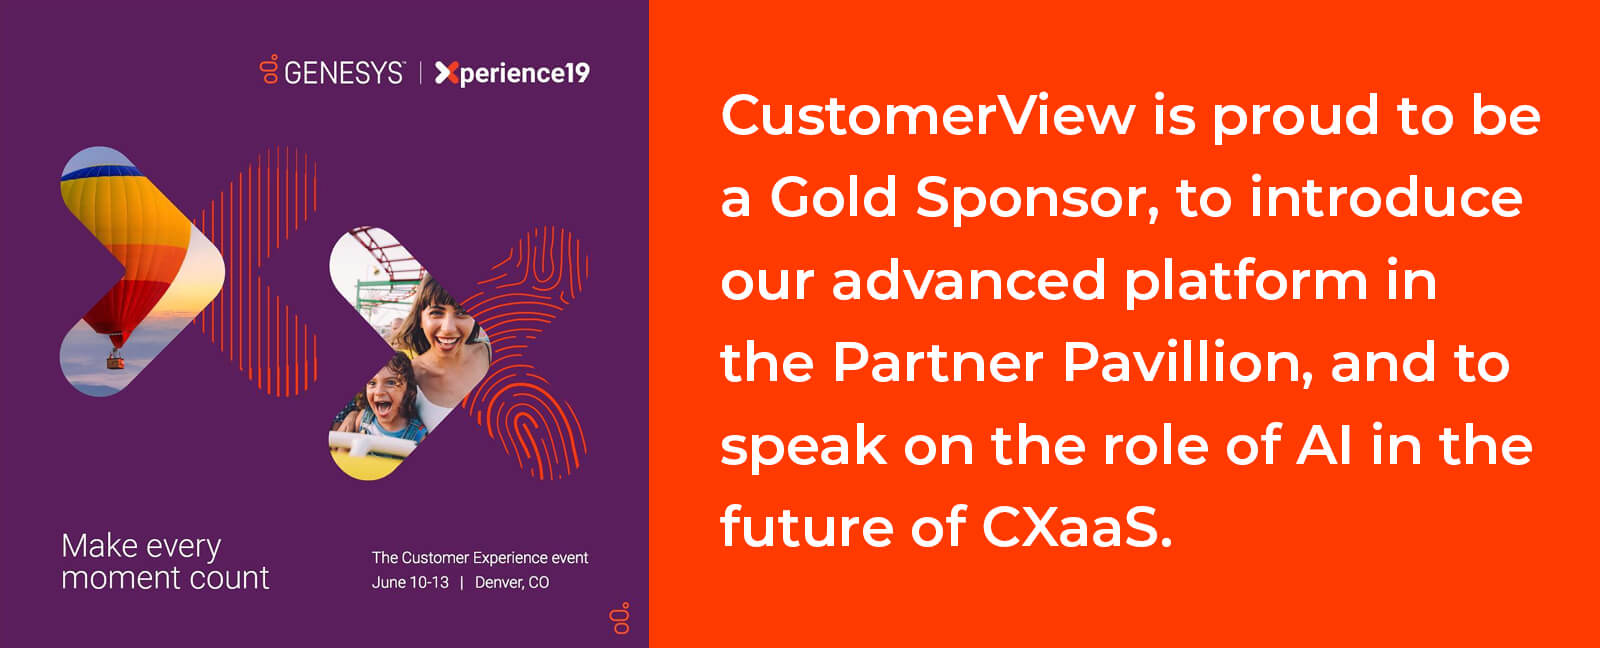 CustomerView Gold Sponsor Genesys Xperience19